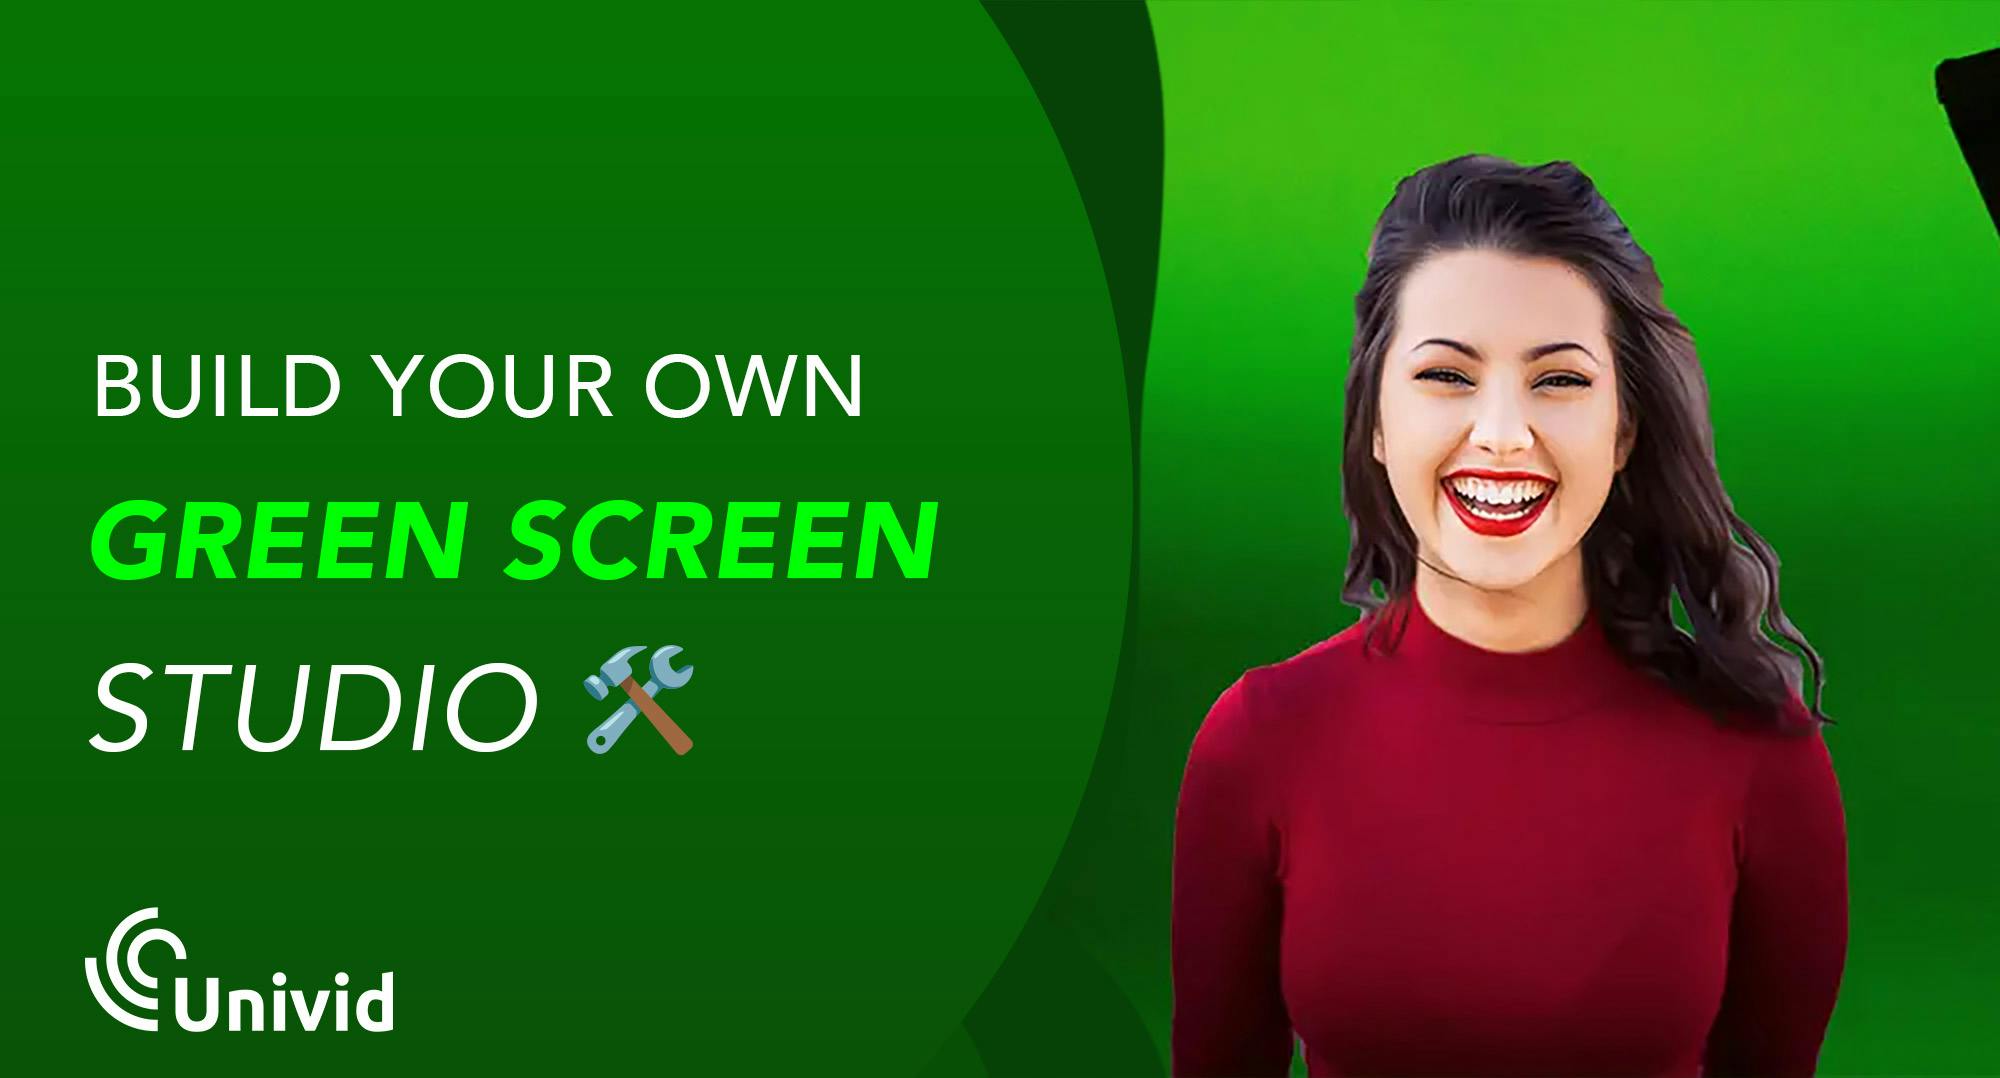 A few actionable tips on how to use a green screen to remove your background. Build a studio in your office or at home - go live like a professional.